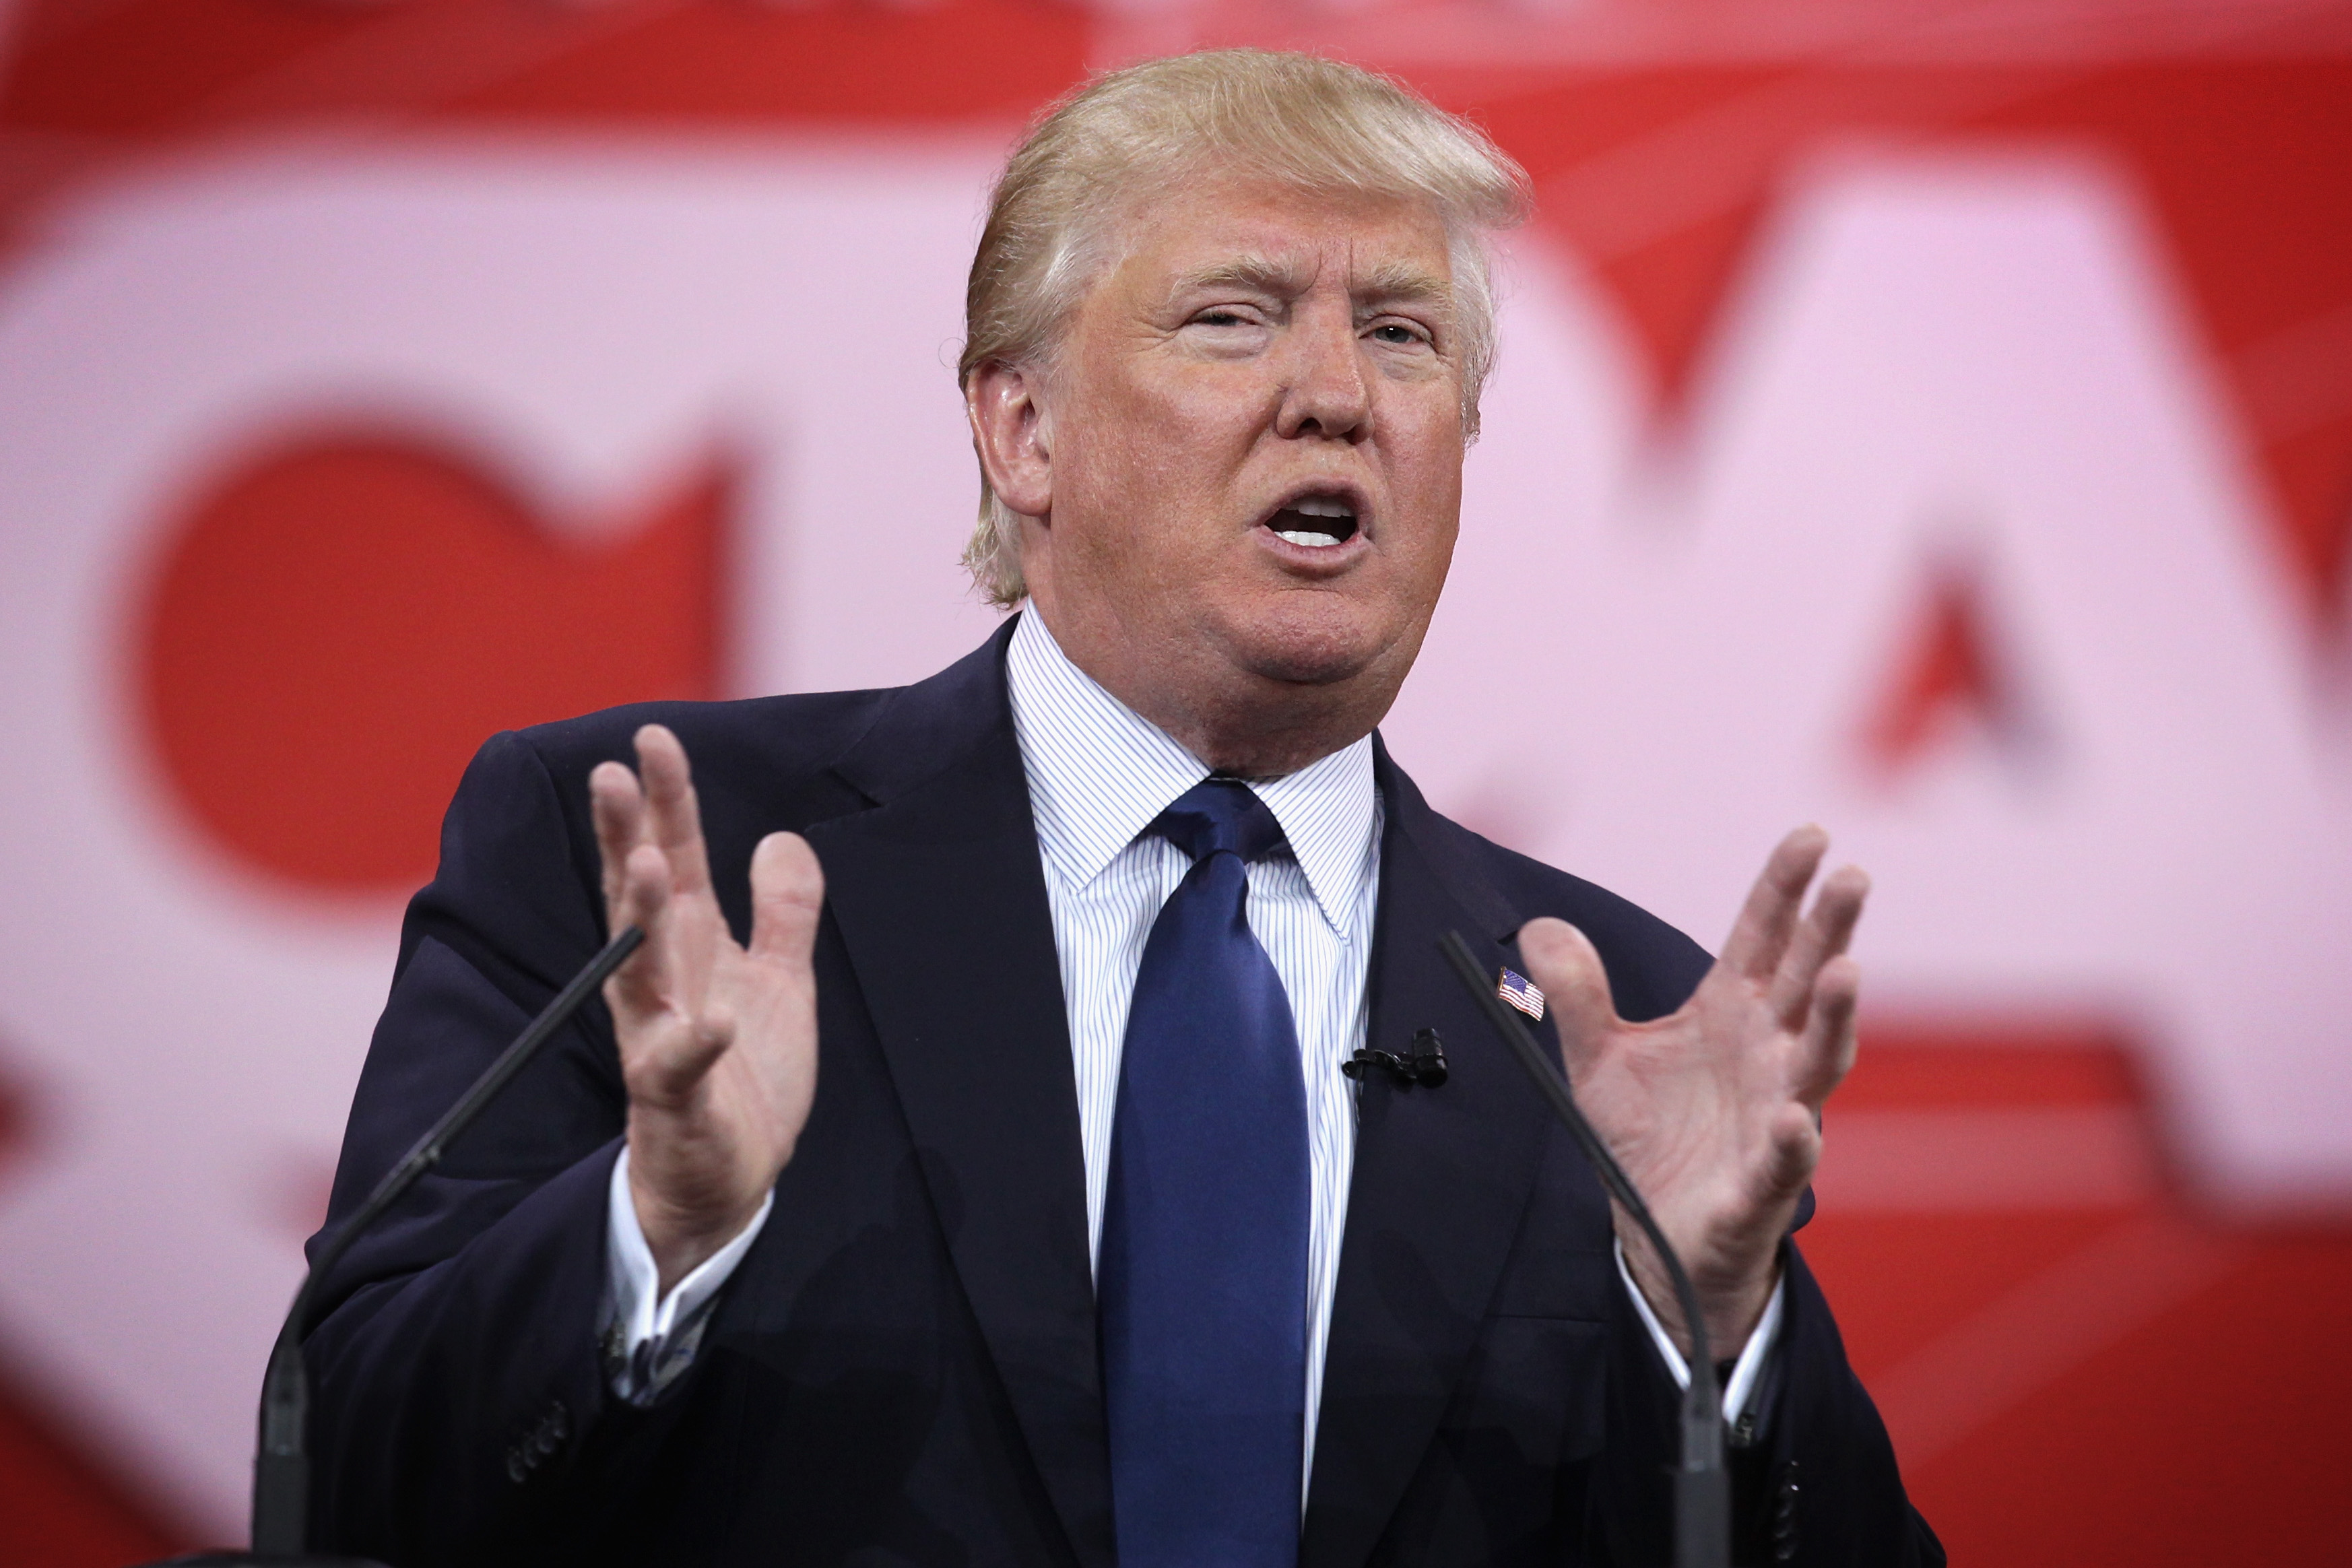 Donald Trump speaks at the Conservative Political Action Conference in February. (Alex Wong—Getty Images)